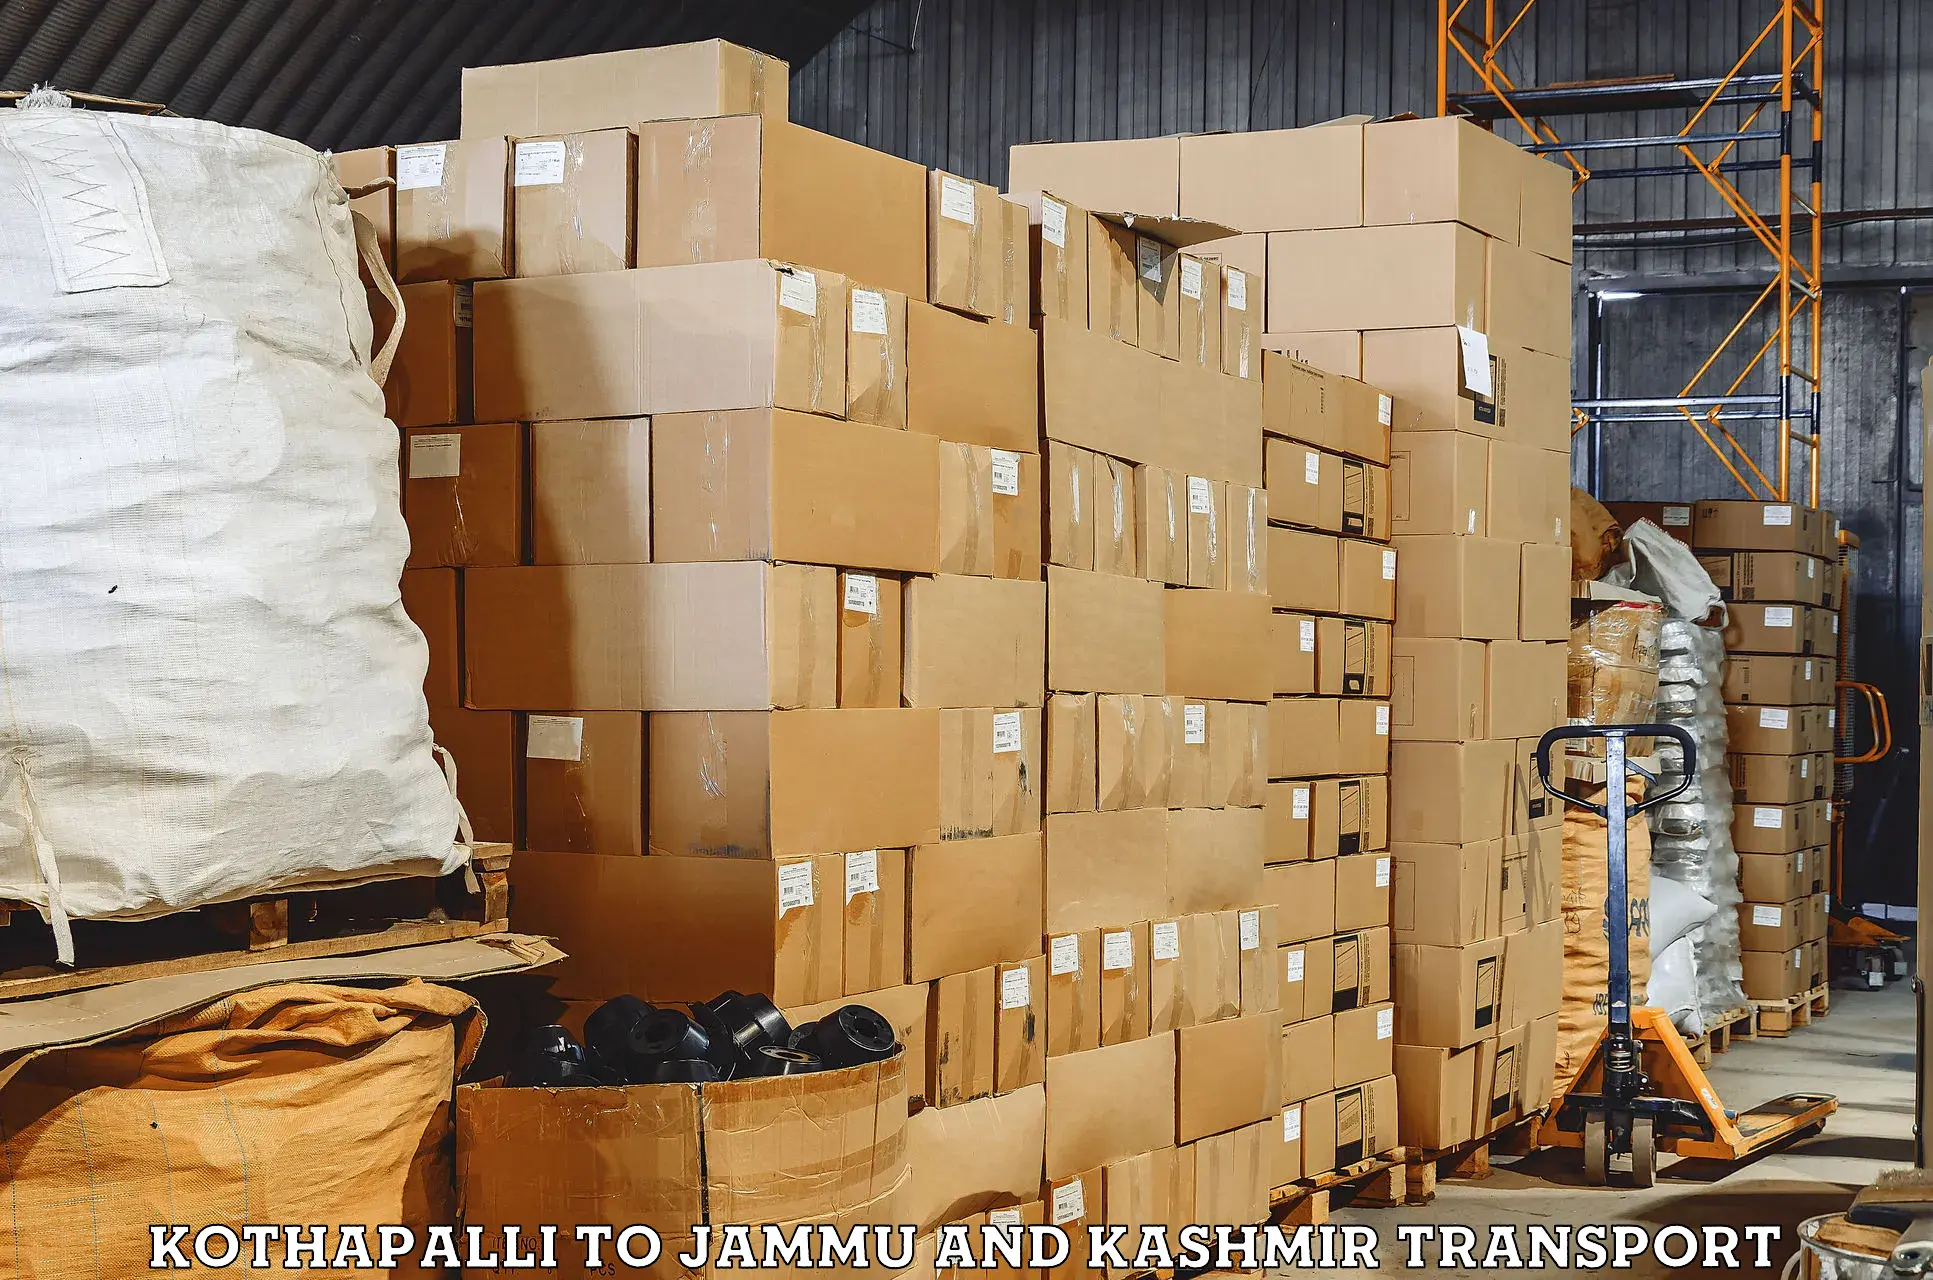 Truck transport companies in India Kothapalli to Anantnag